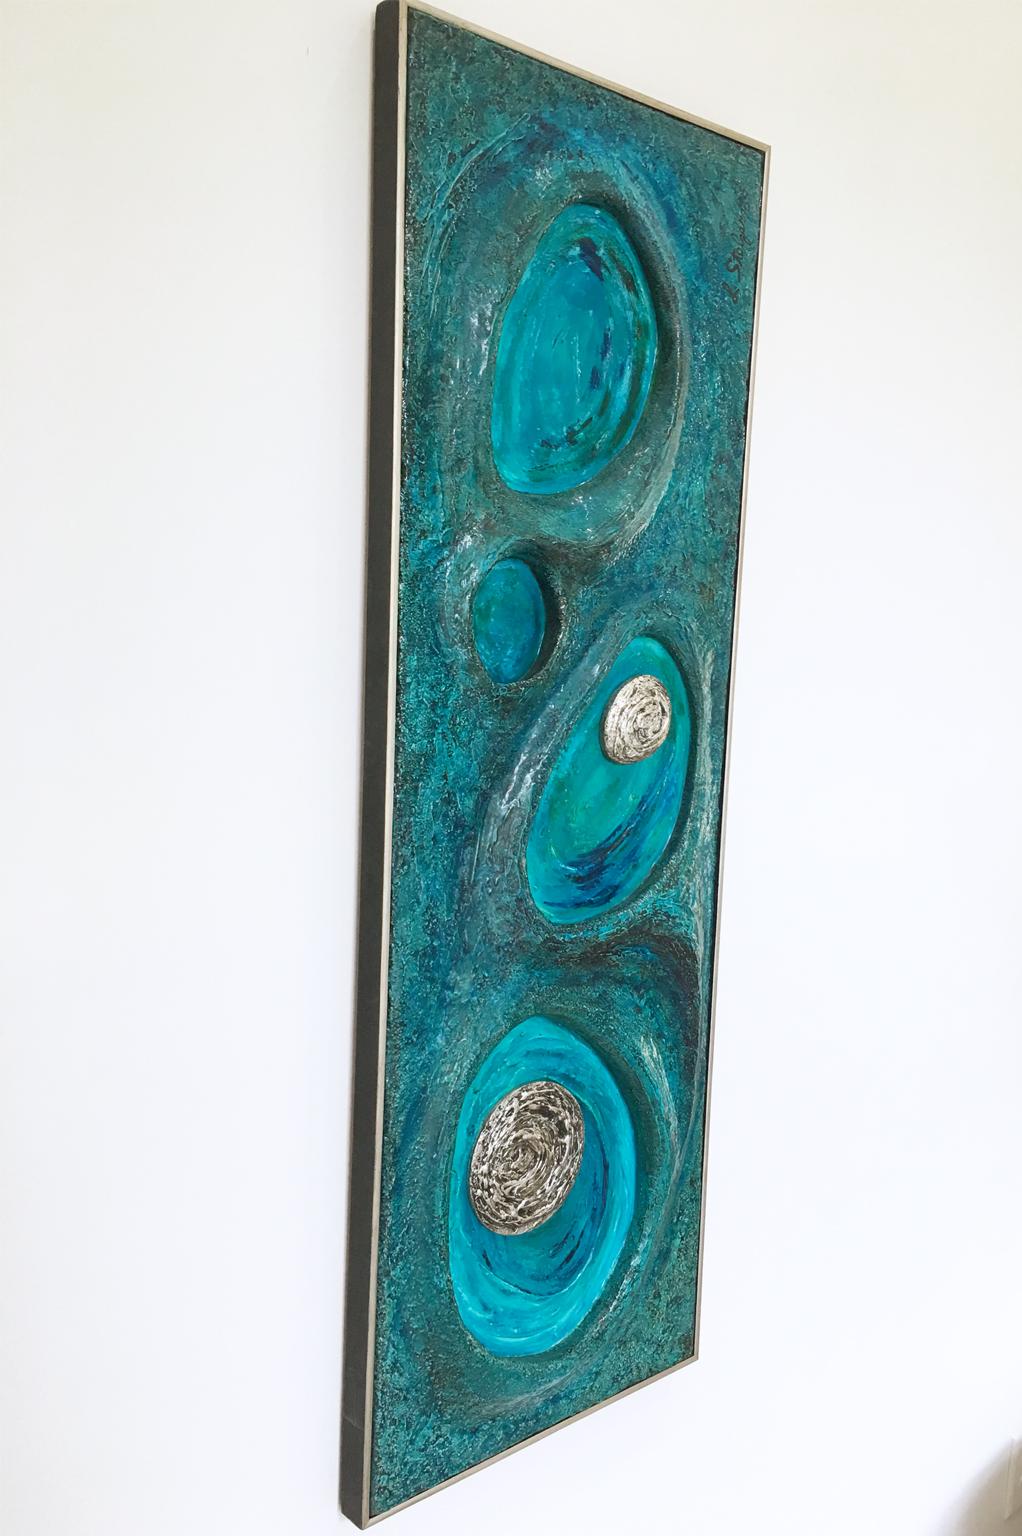 Psychedelic Turquoise Acrylic Resin Art Wall Sculpture Panel by Lorraine Stelzer For Sale 4